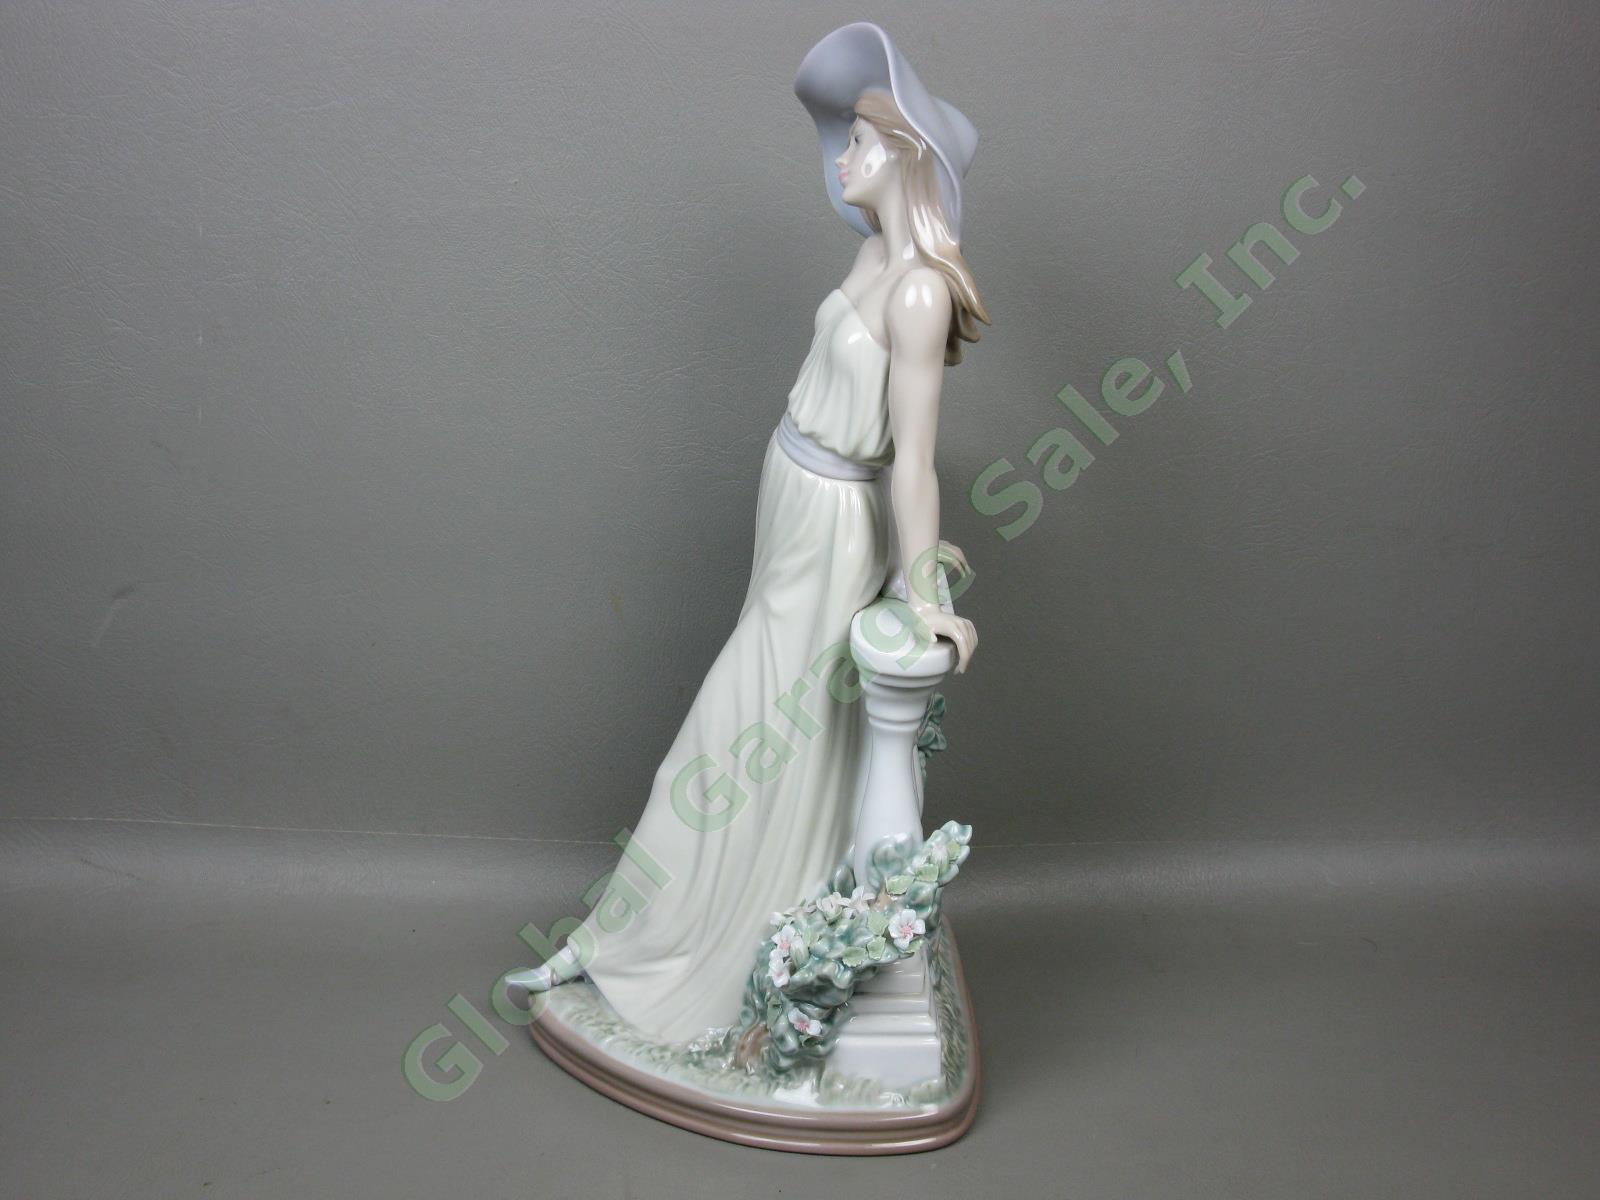 Vtg Lladro #5378 Time For Reflection 13.5" Figurine 1986-1992 Woman Flowers Hat 2